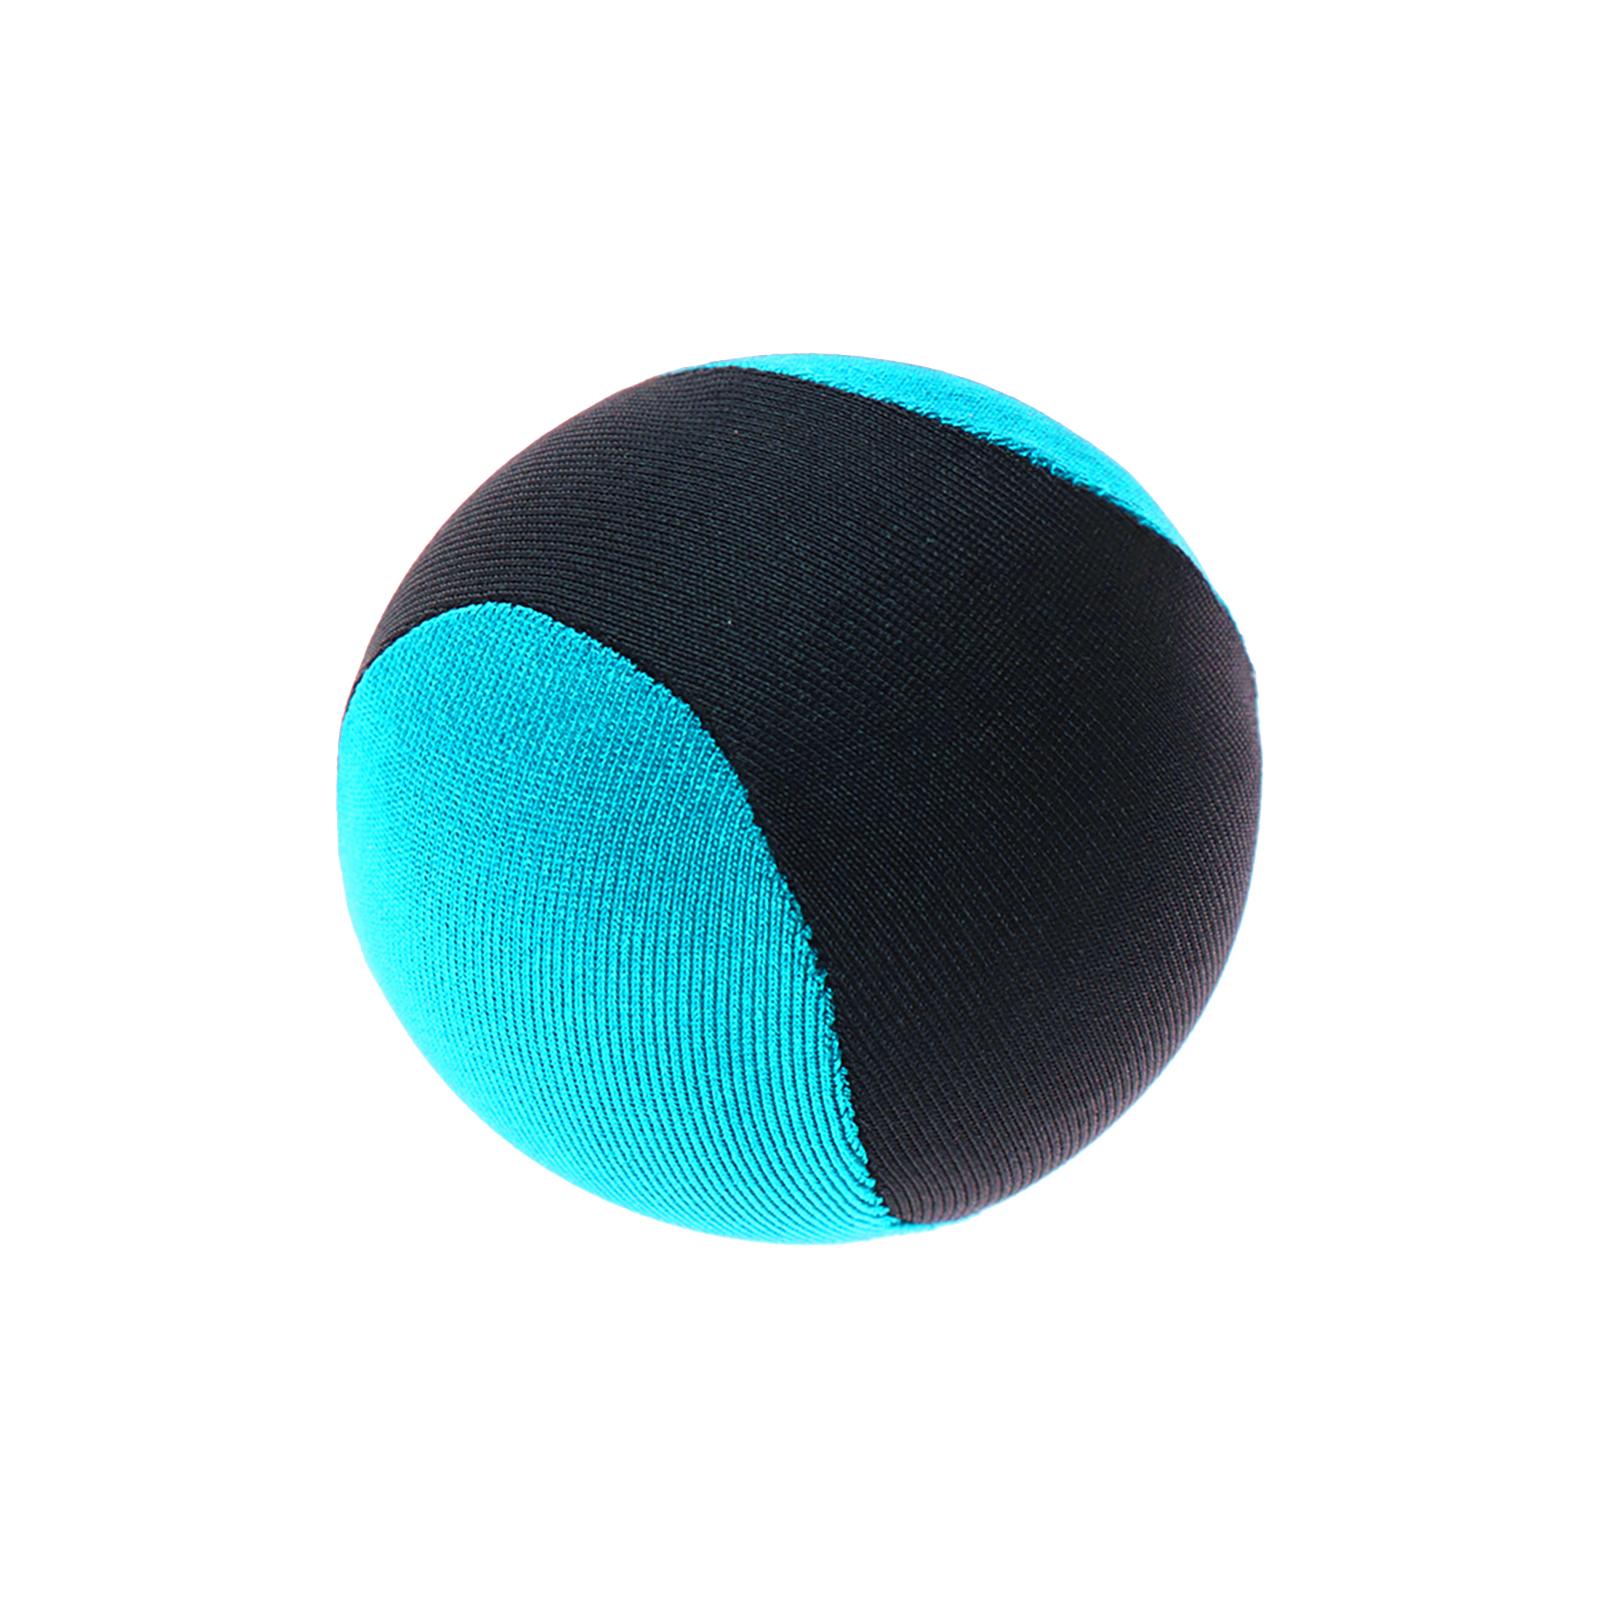 Bouncing Ball Sensory Toy Soft Relax Skipping Ball for Games Holiday Outdoor Green 60mm